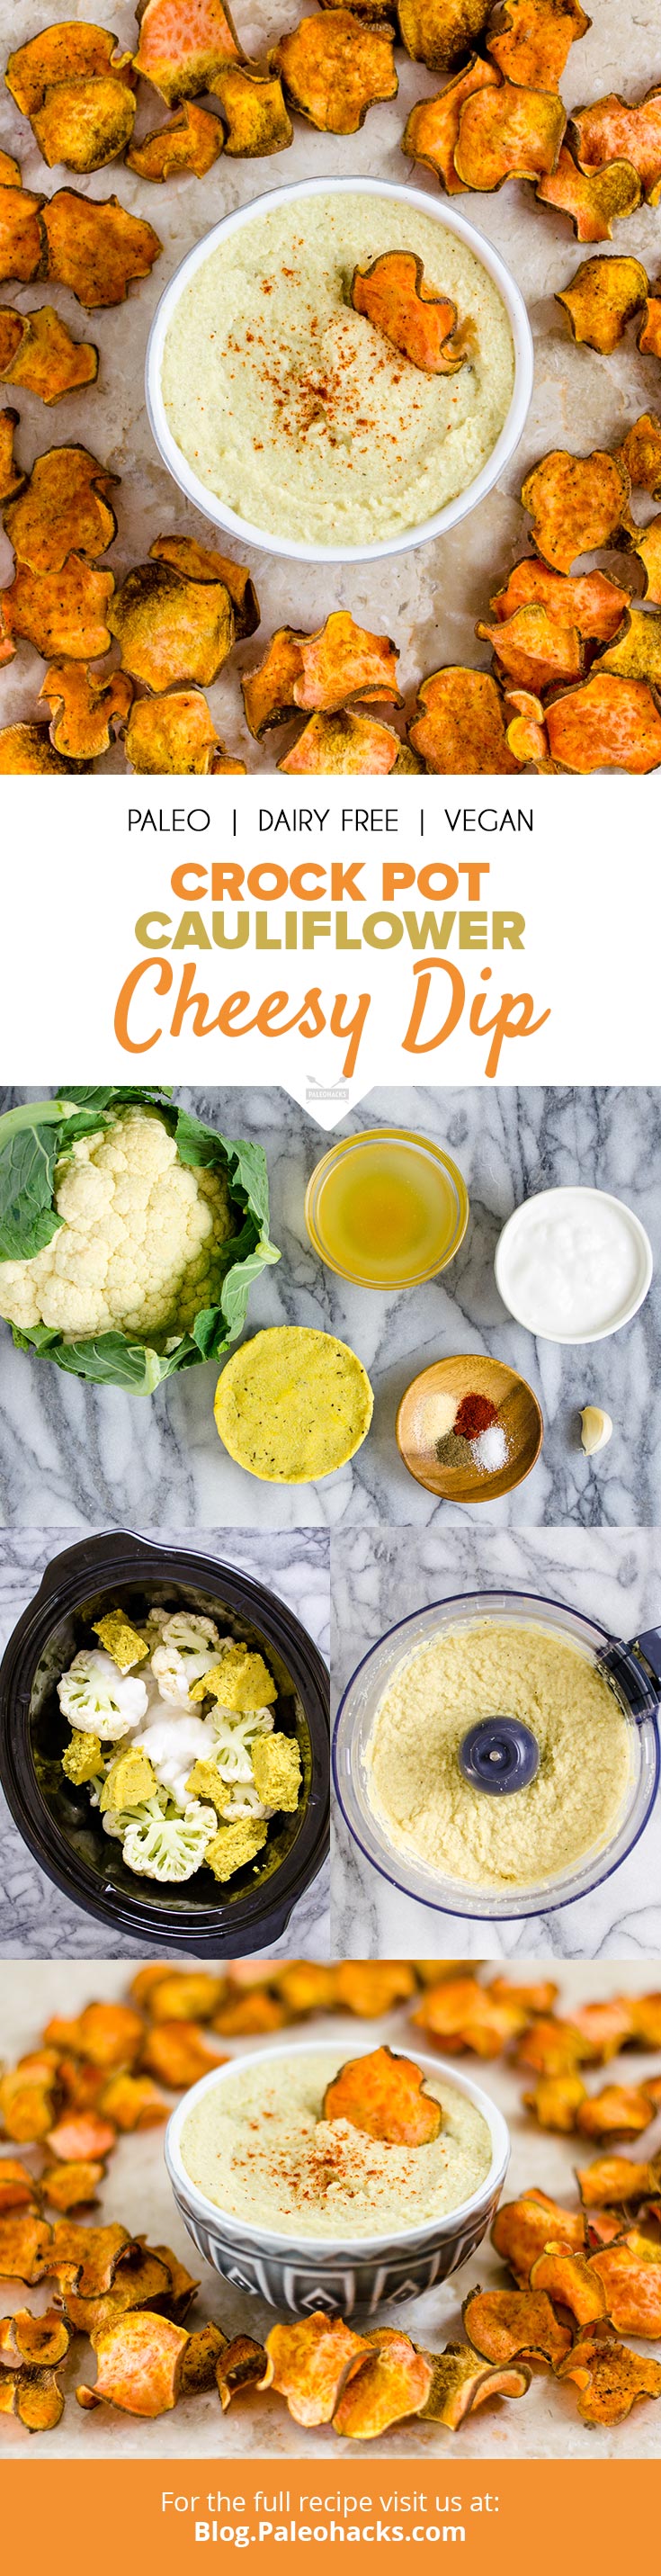 Wonderfully hot and cheesy, this Paleo Parmesan dip is a crowd-pleasing appetizer. Whip this up for parties, family get-togethers or as your new go-to snack.